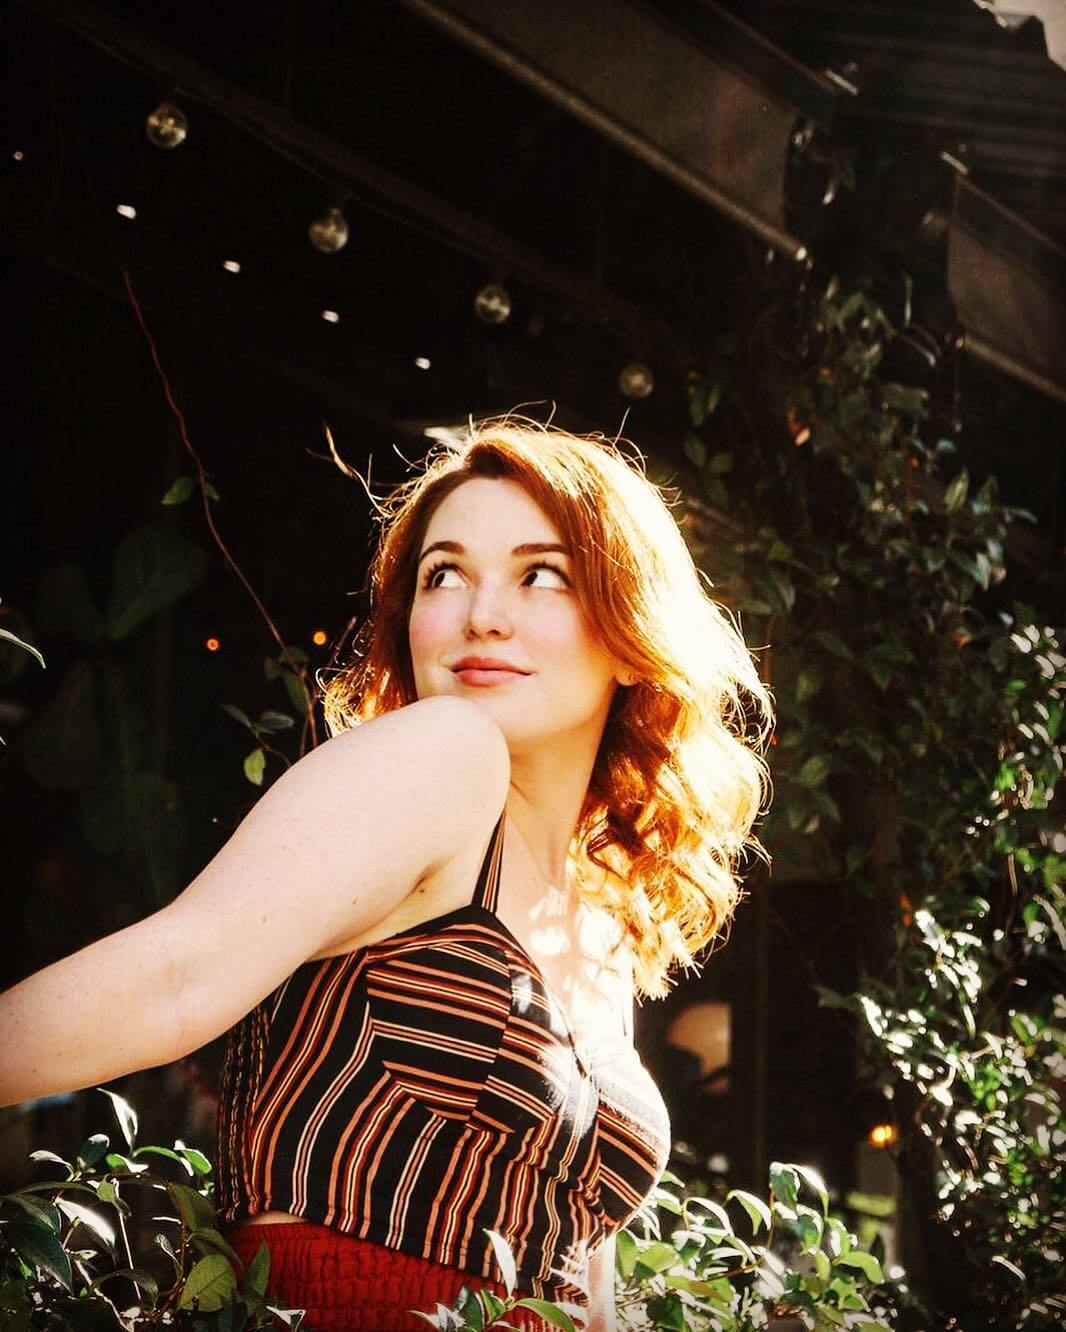 49 Hot Pictures Of Jennifer Stone Are Really Mesmerising And Beautiful | Best Of Comic Books